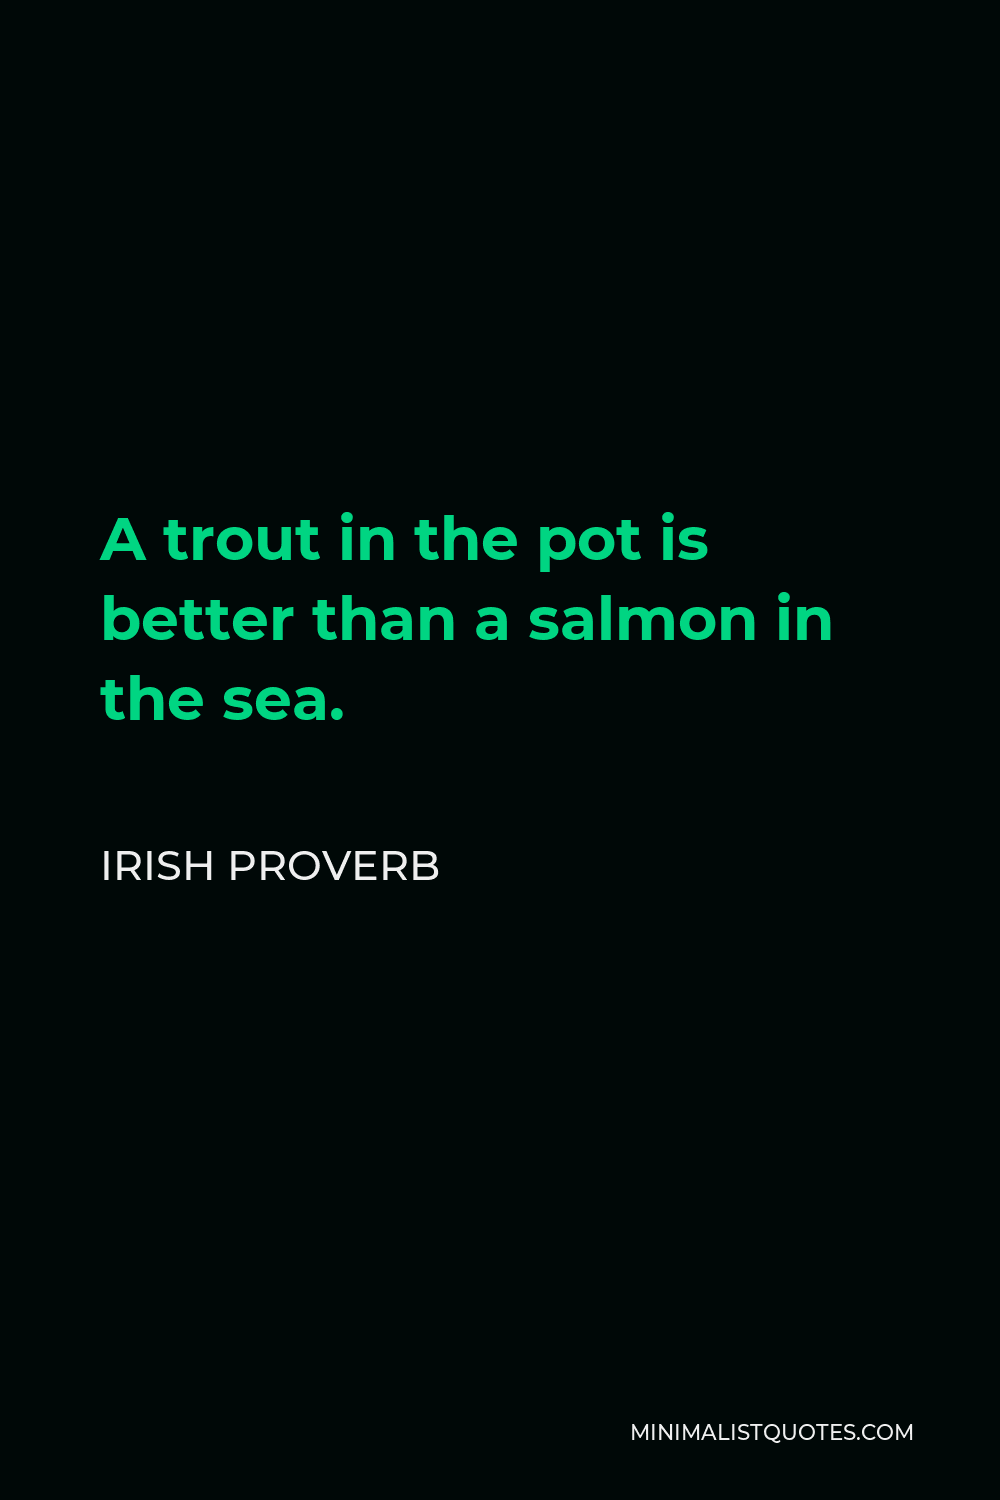 Irish Proverb Quote - A trout in the pot is better than a salmon in the sea.